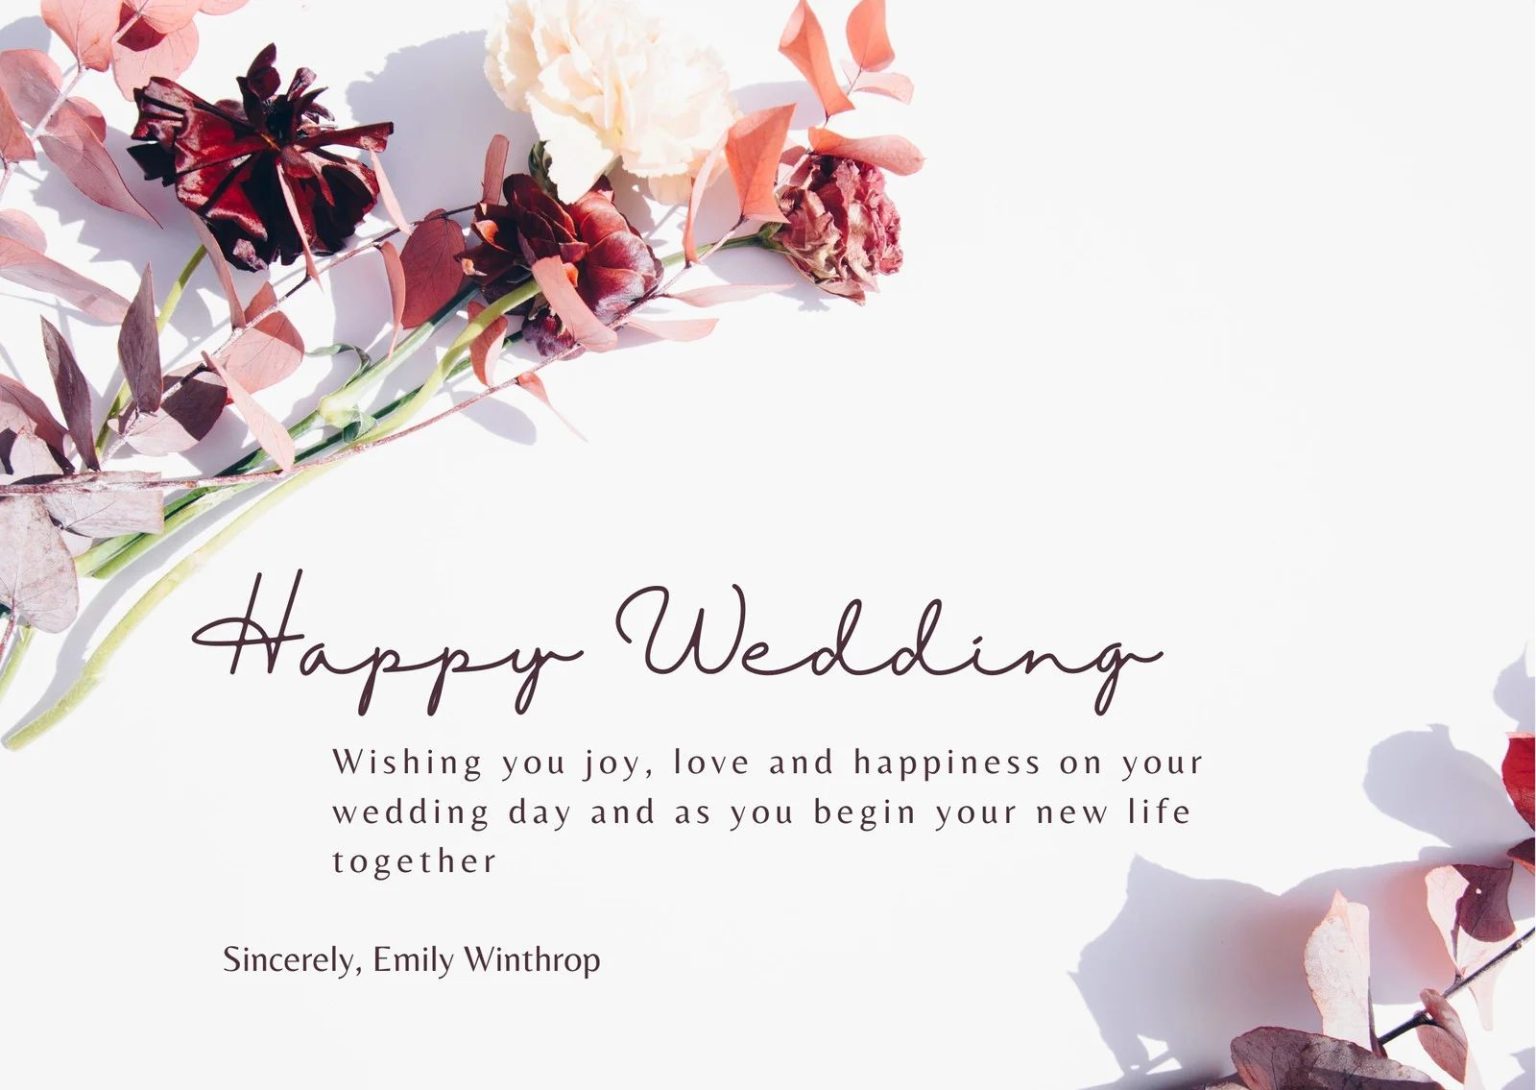 150+ Wedding Wishes What To Write In A Wedding Card [Examples & Tips]